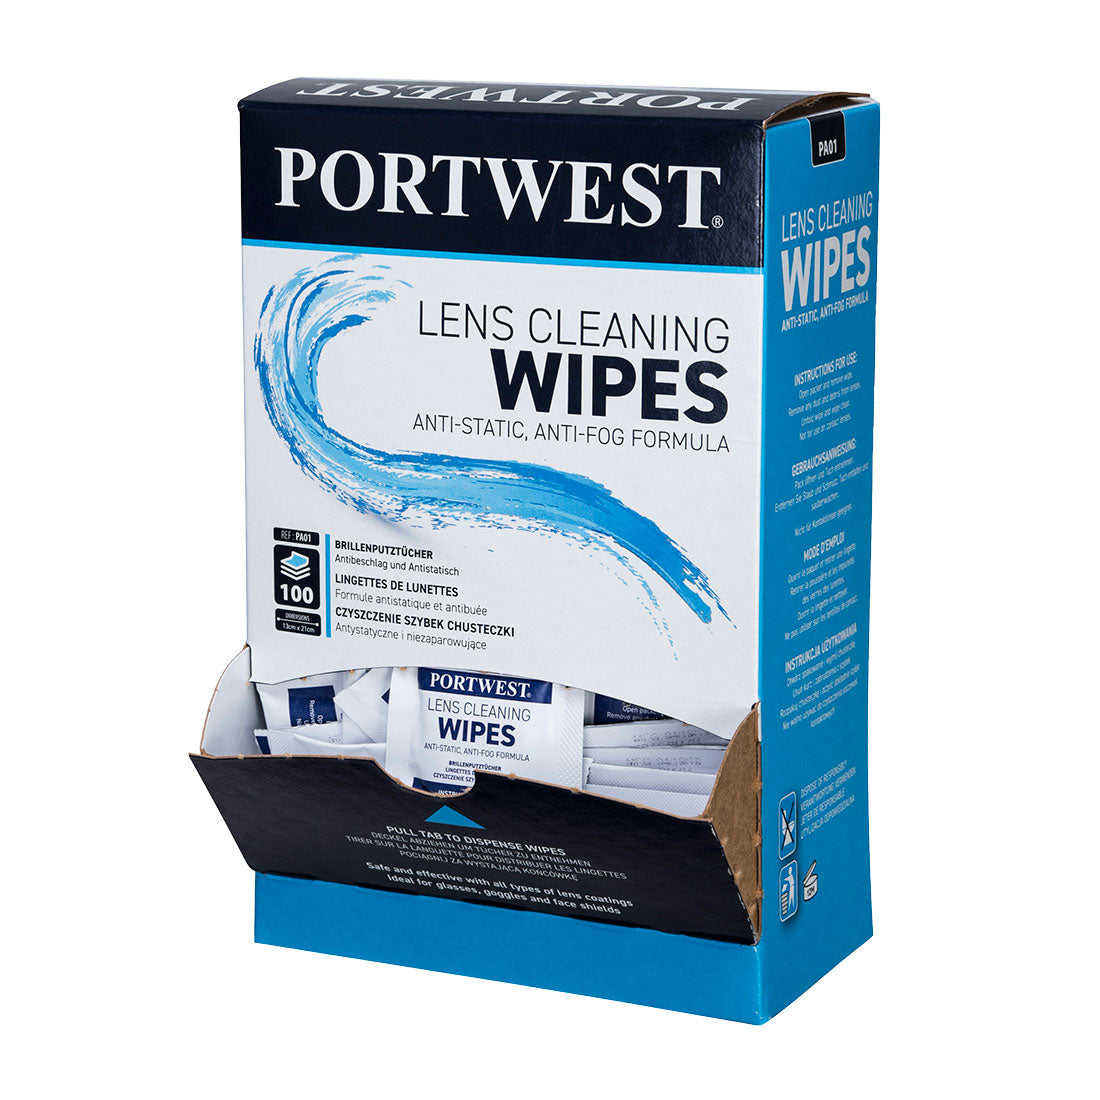 PA01 - Lens Cleaning Wipes - 100 wipes